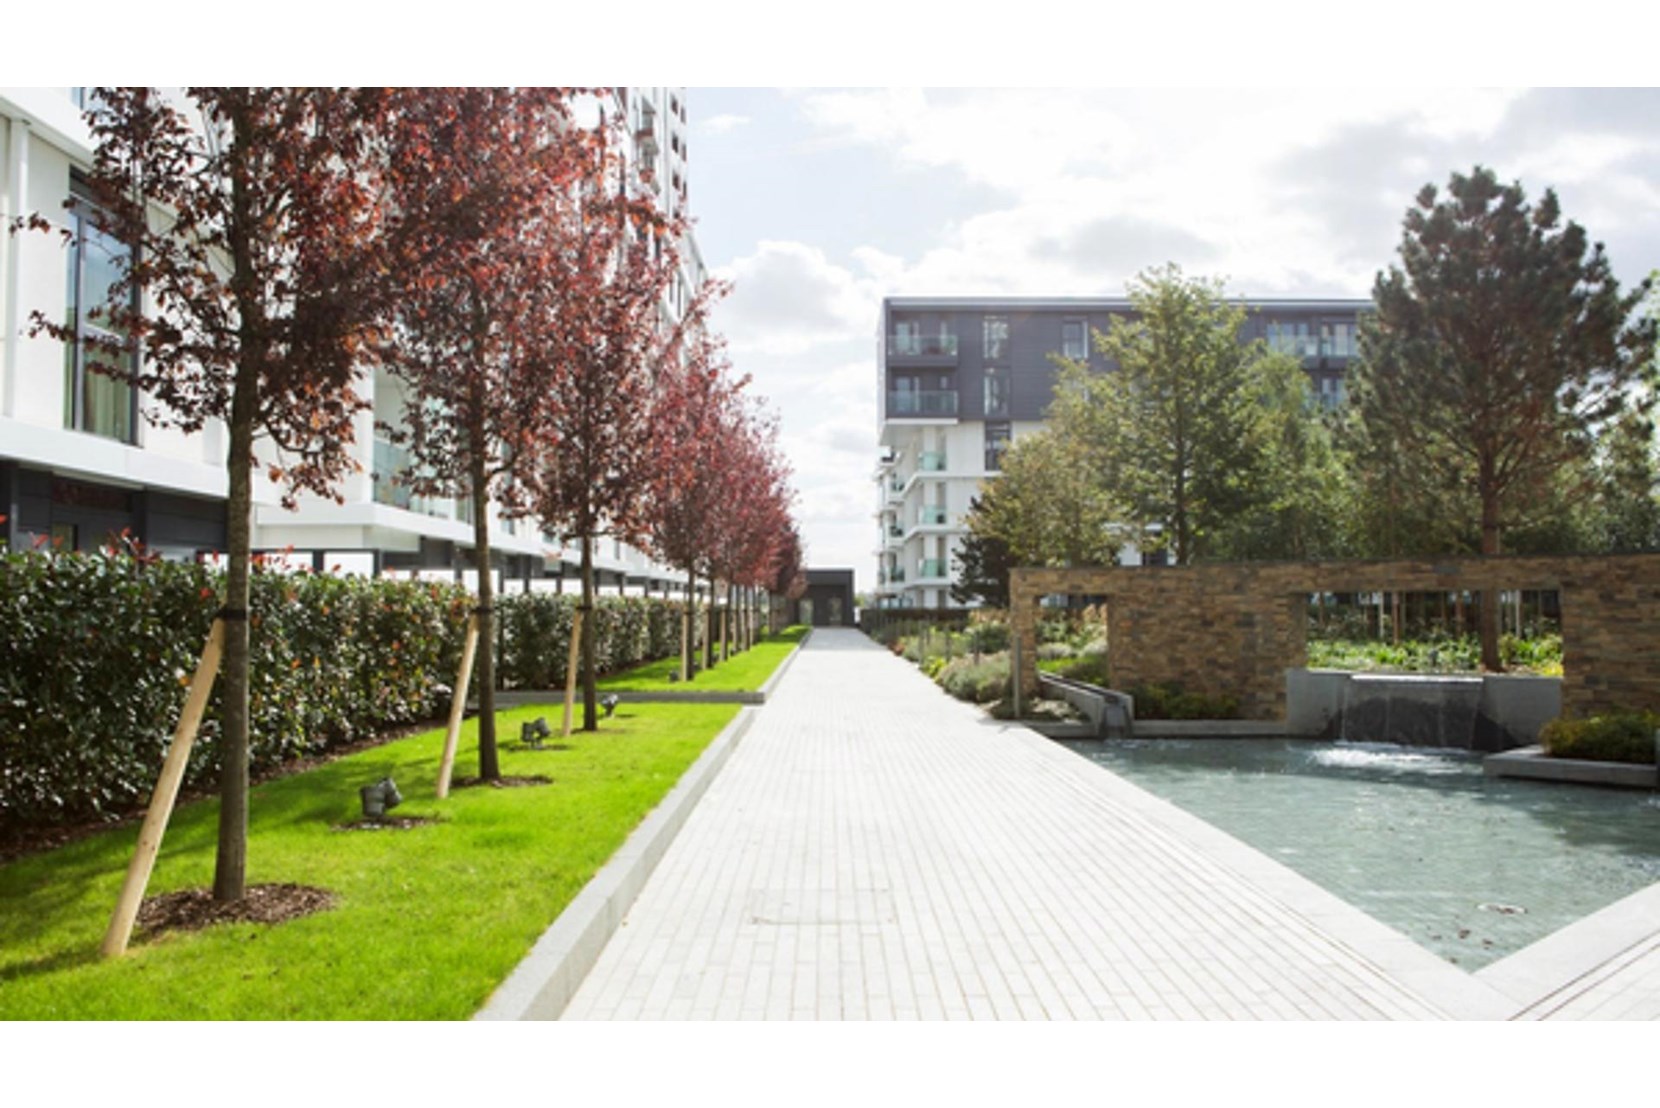 Apartments to Rent by Greystar at Nine Elms Point, Lambeth, SW8, communal gardens